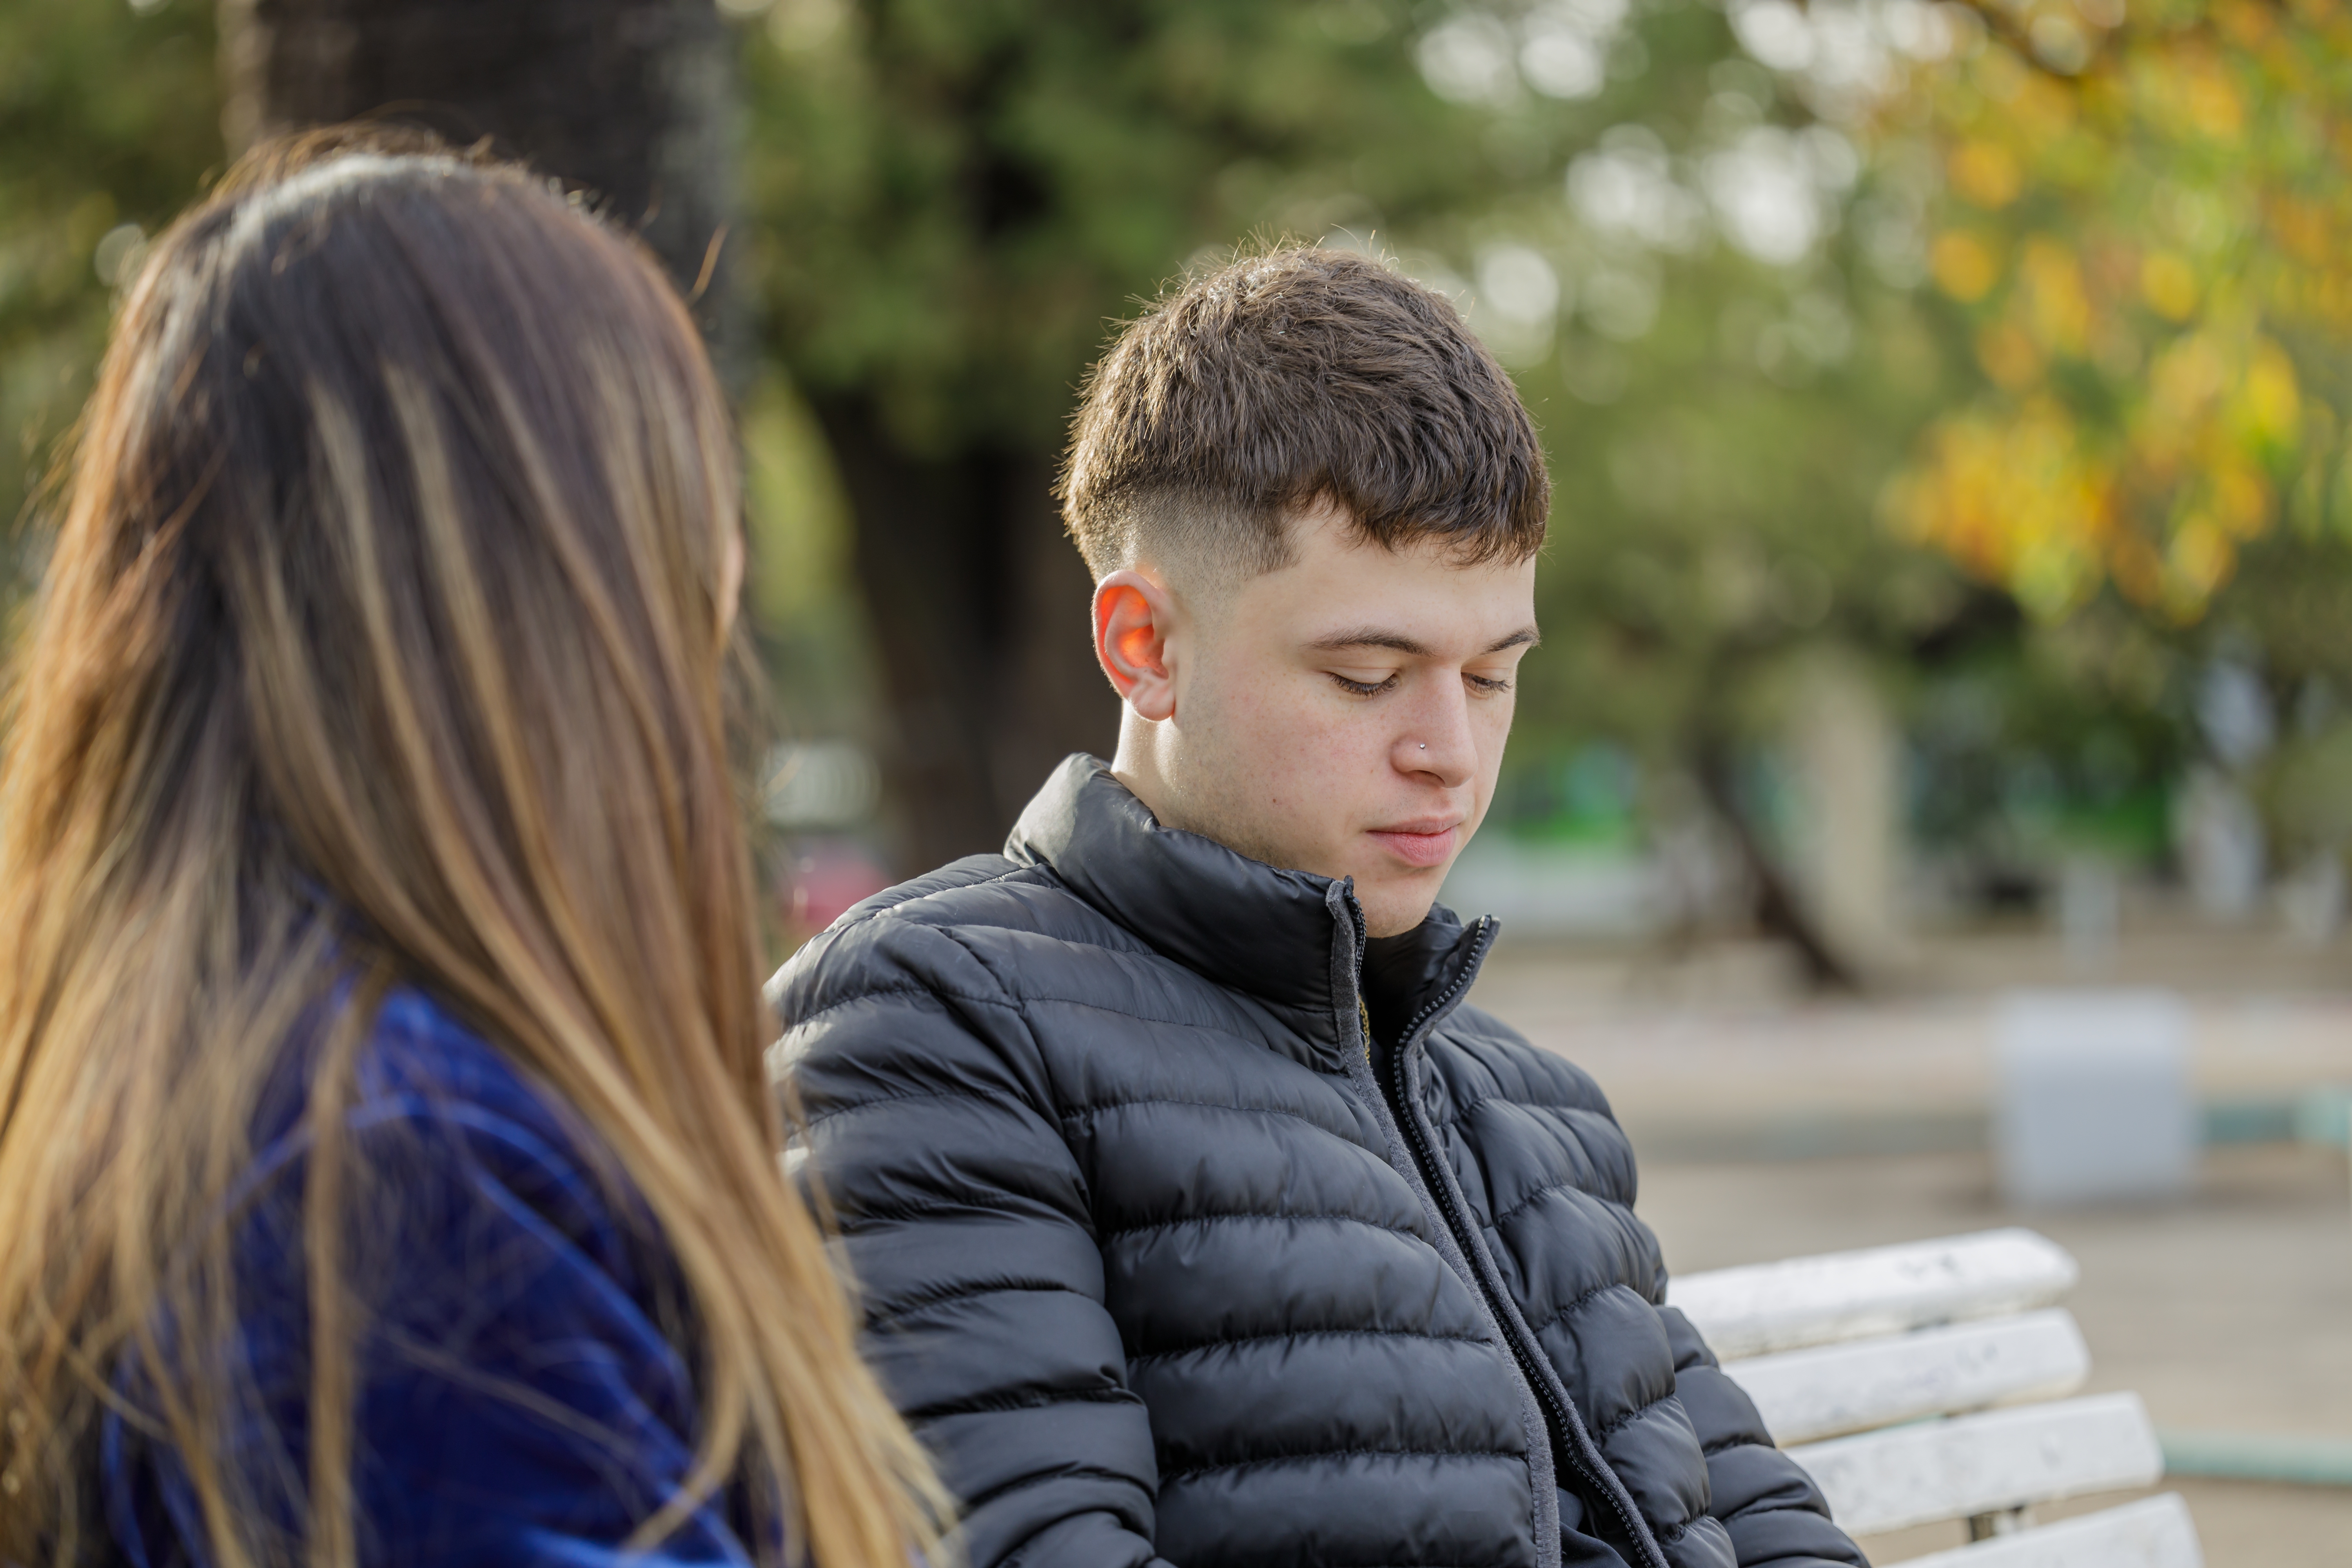 A sad young man telling his story to the woman sitting next to him | Source: Shutterstock